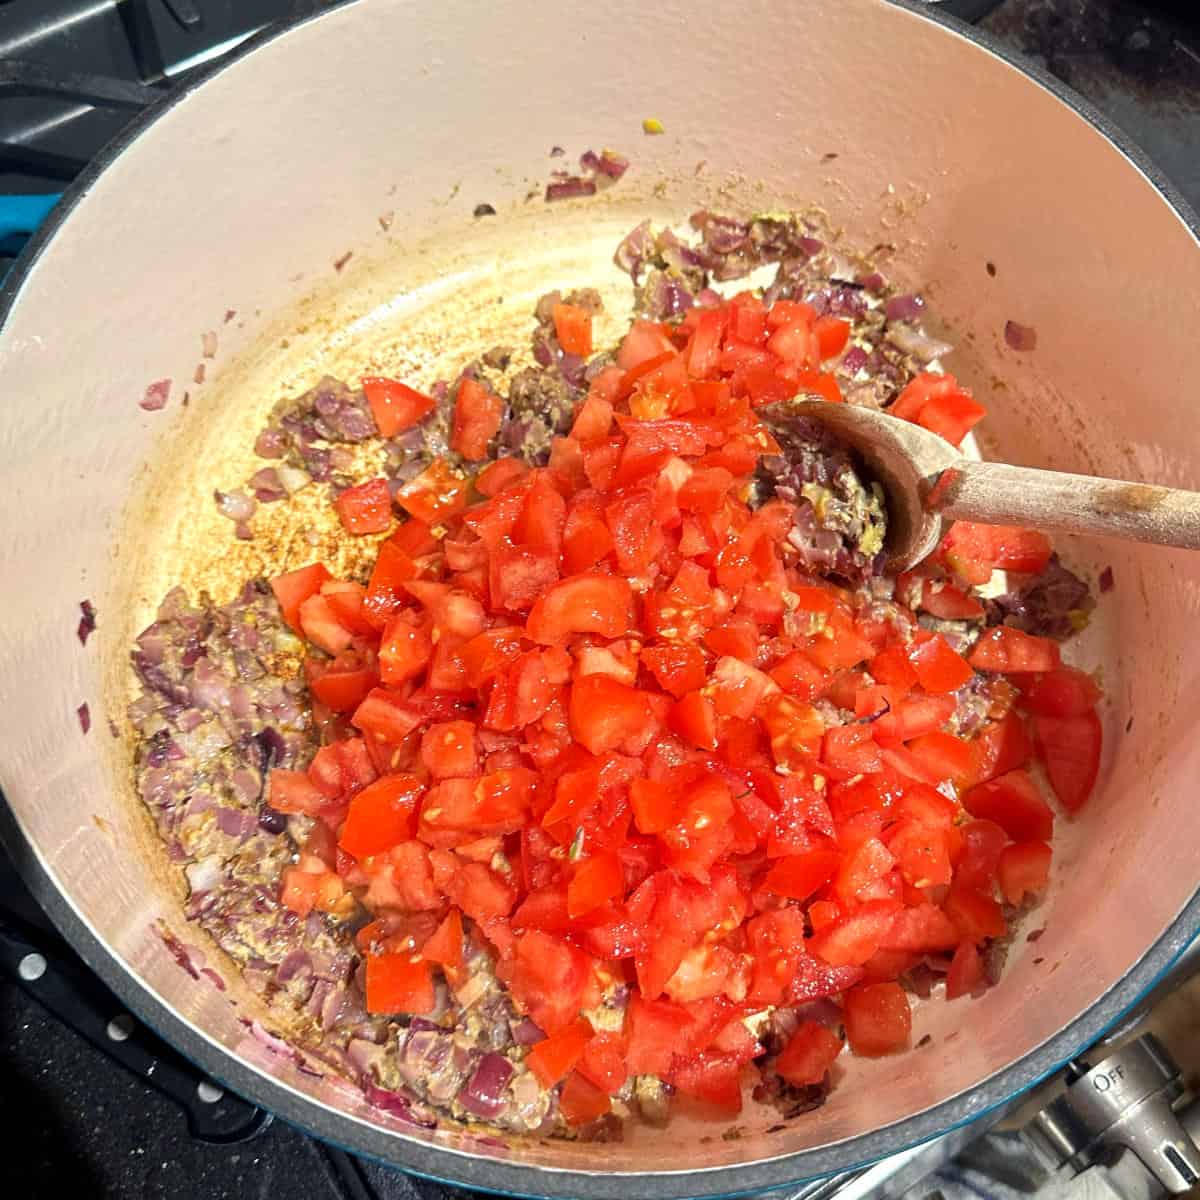 Tomatoes added to pot with onions.